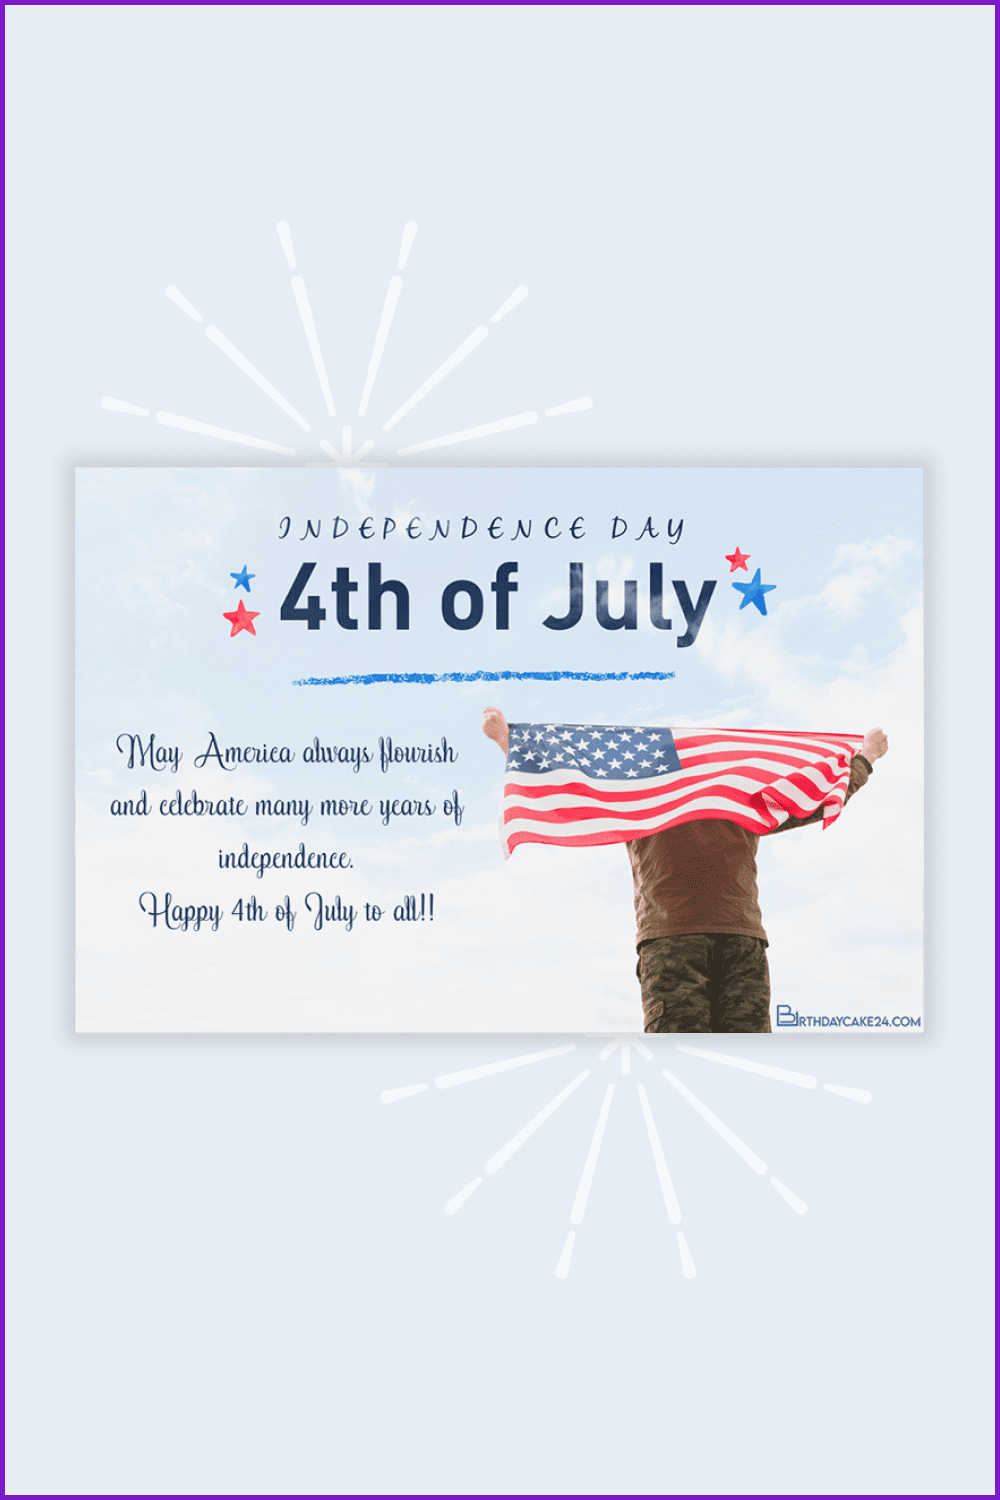 USA Independence Day Card.